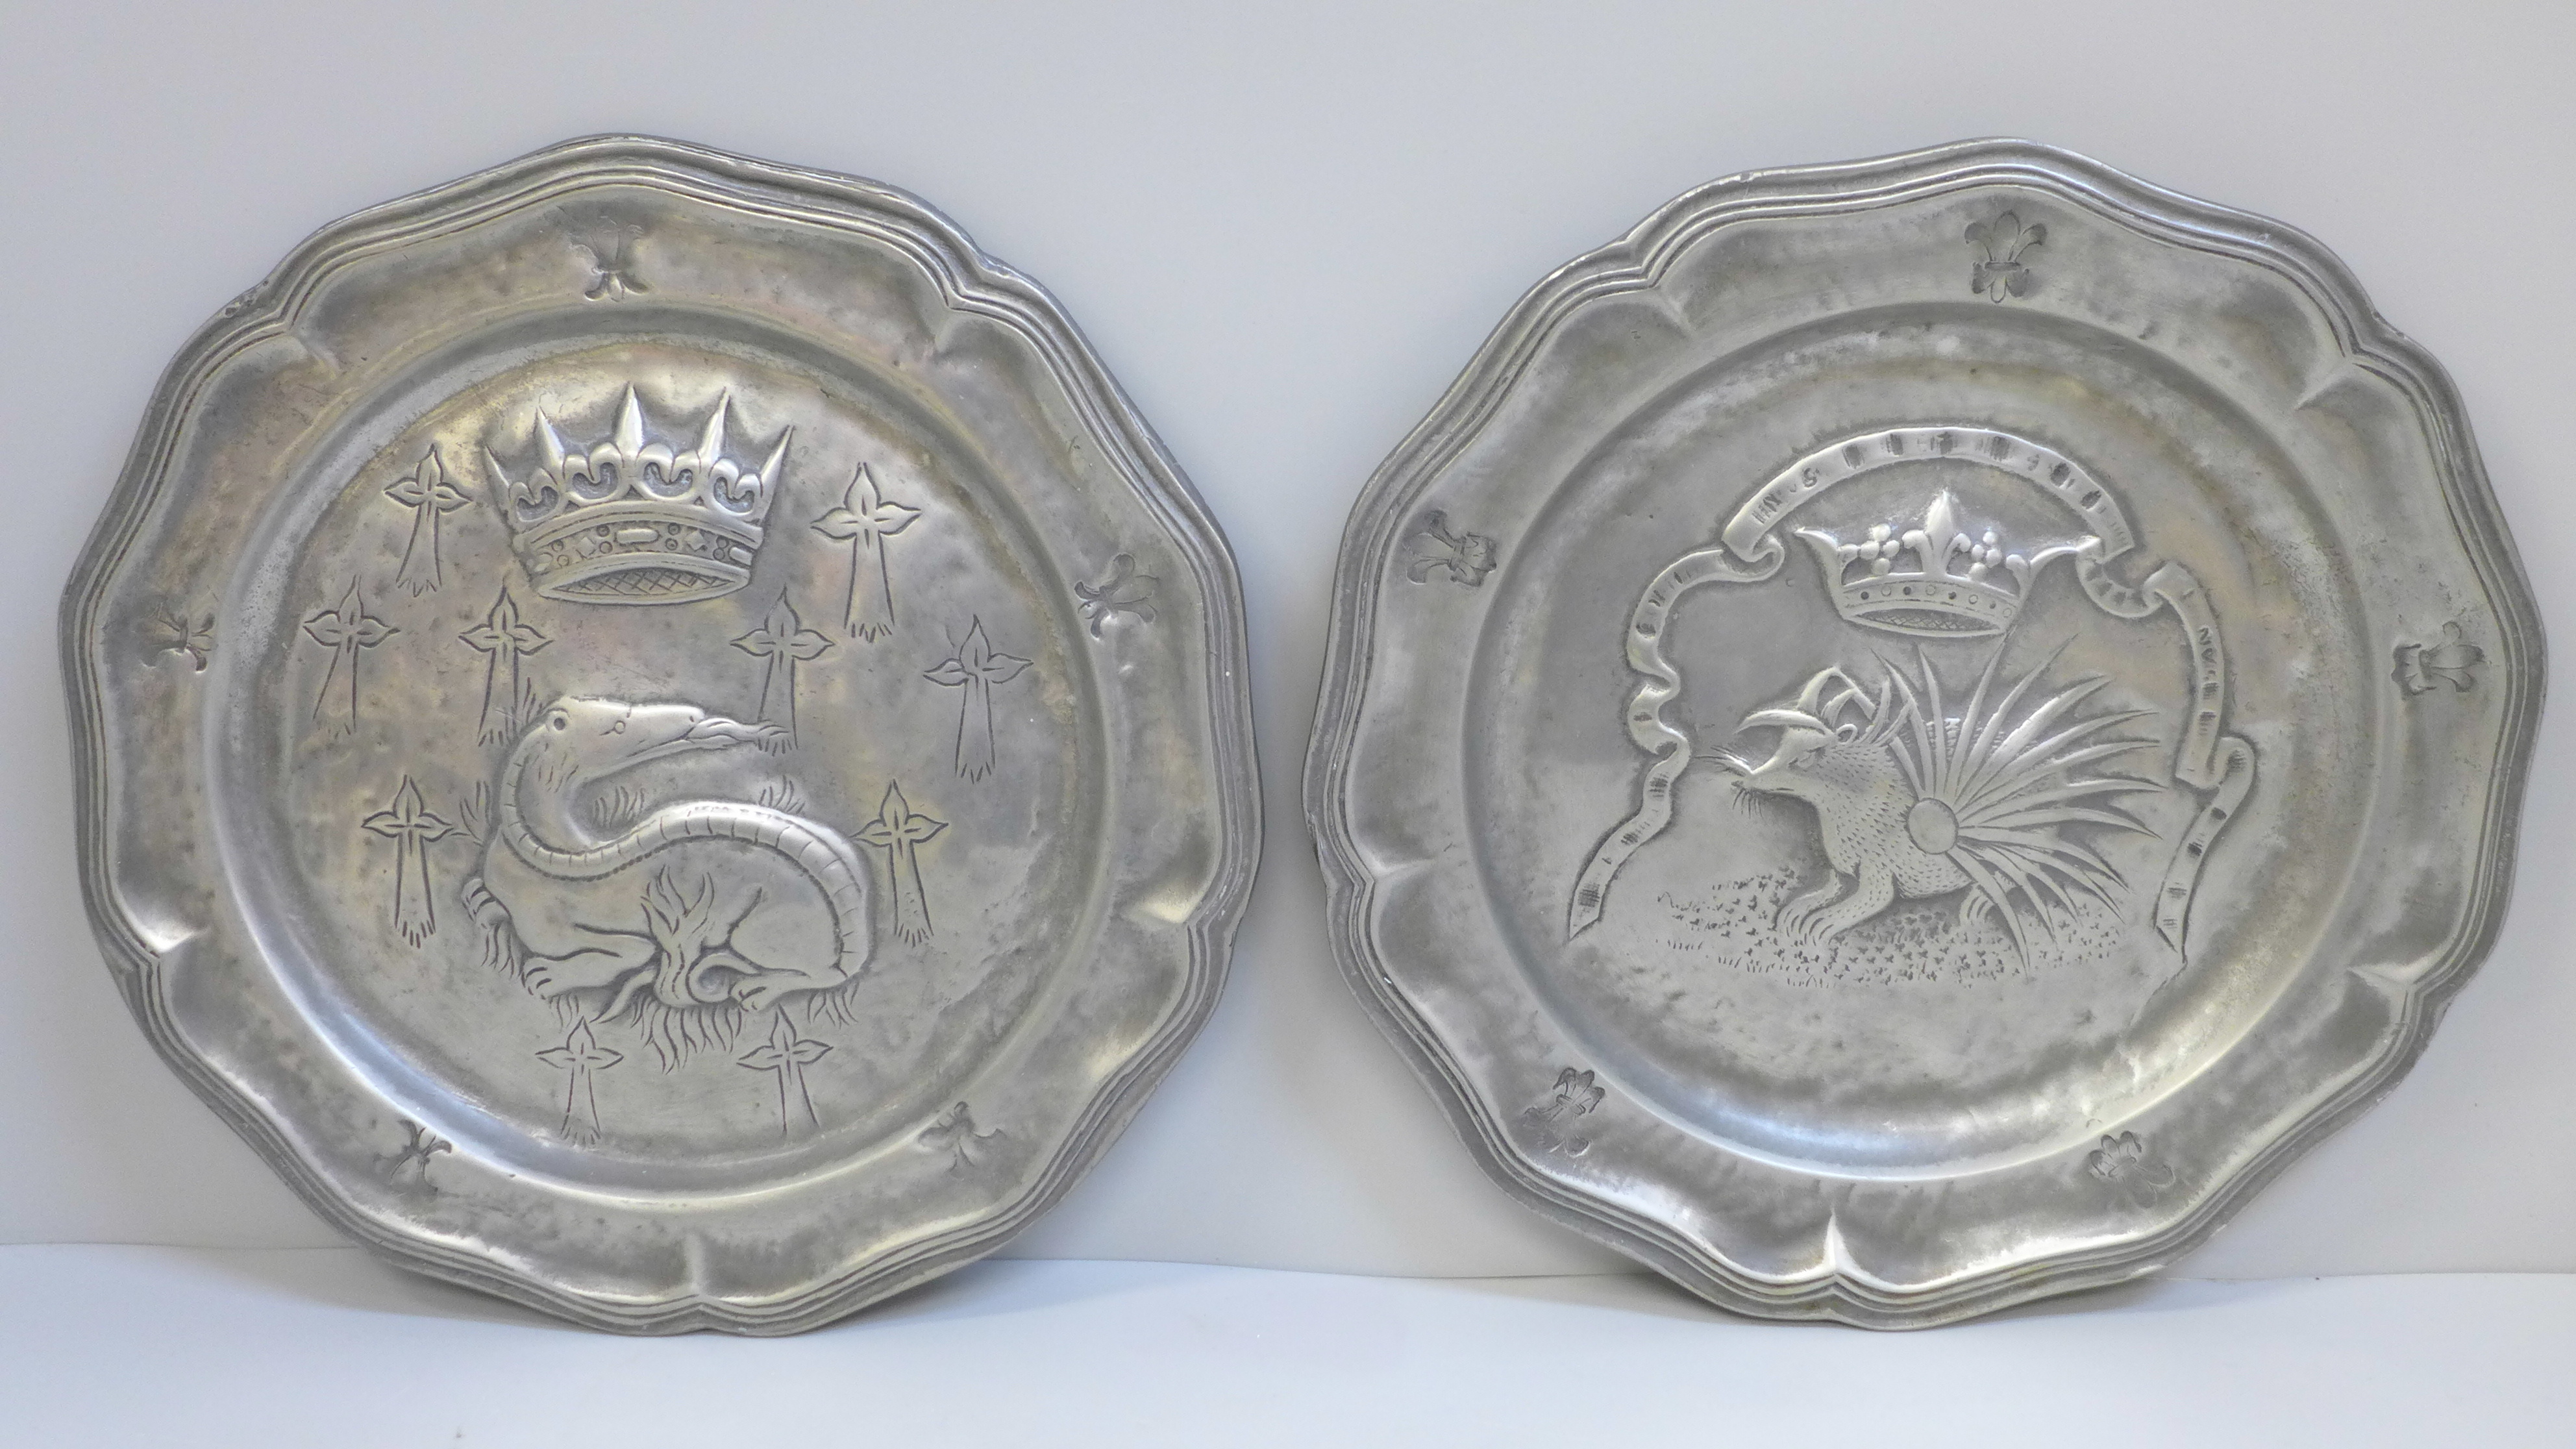 Two French early pewter plates, contoured edges, decorated with crown over a porcupine and a crown